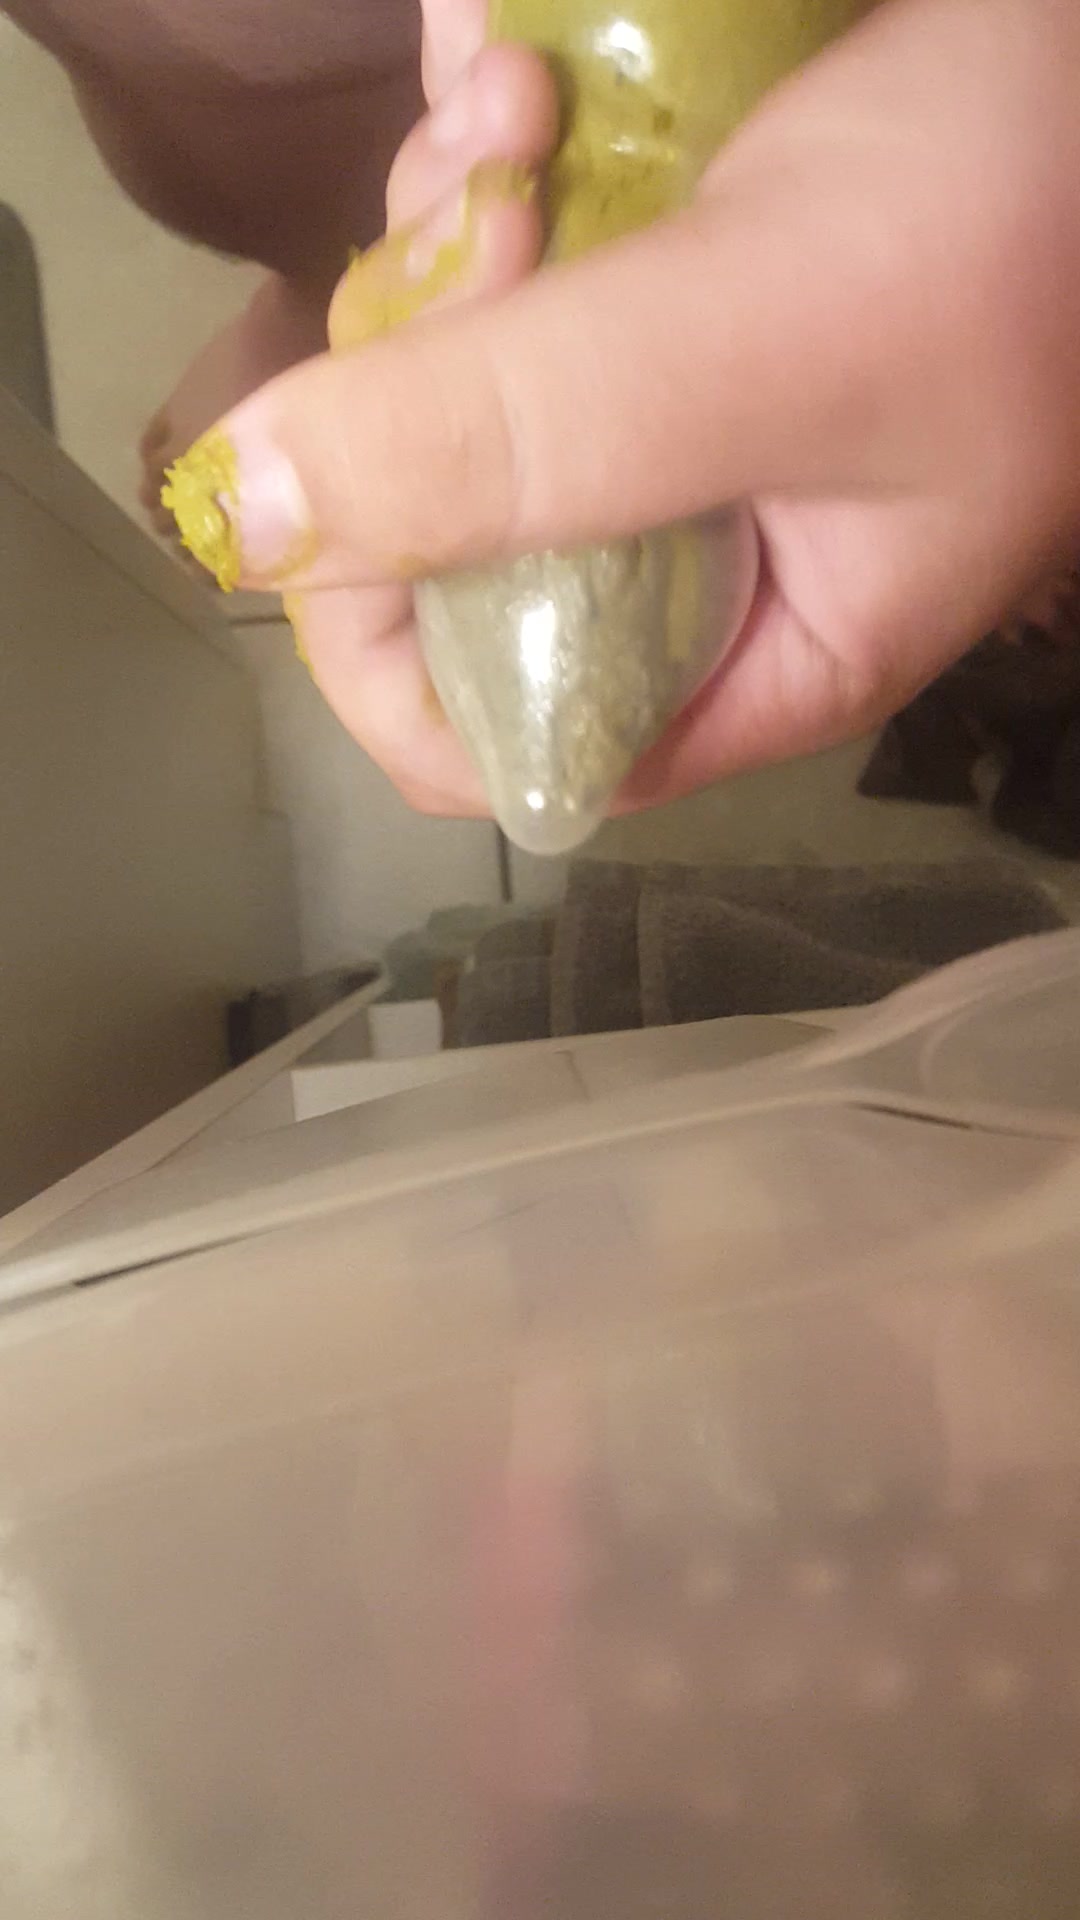 Wearing, pissing, and cumming in a shit filled condom - ScatFap - scat porn search image